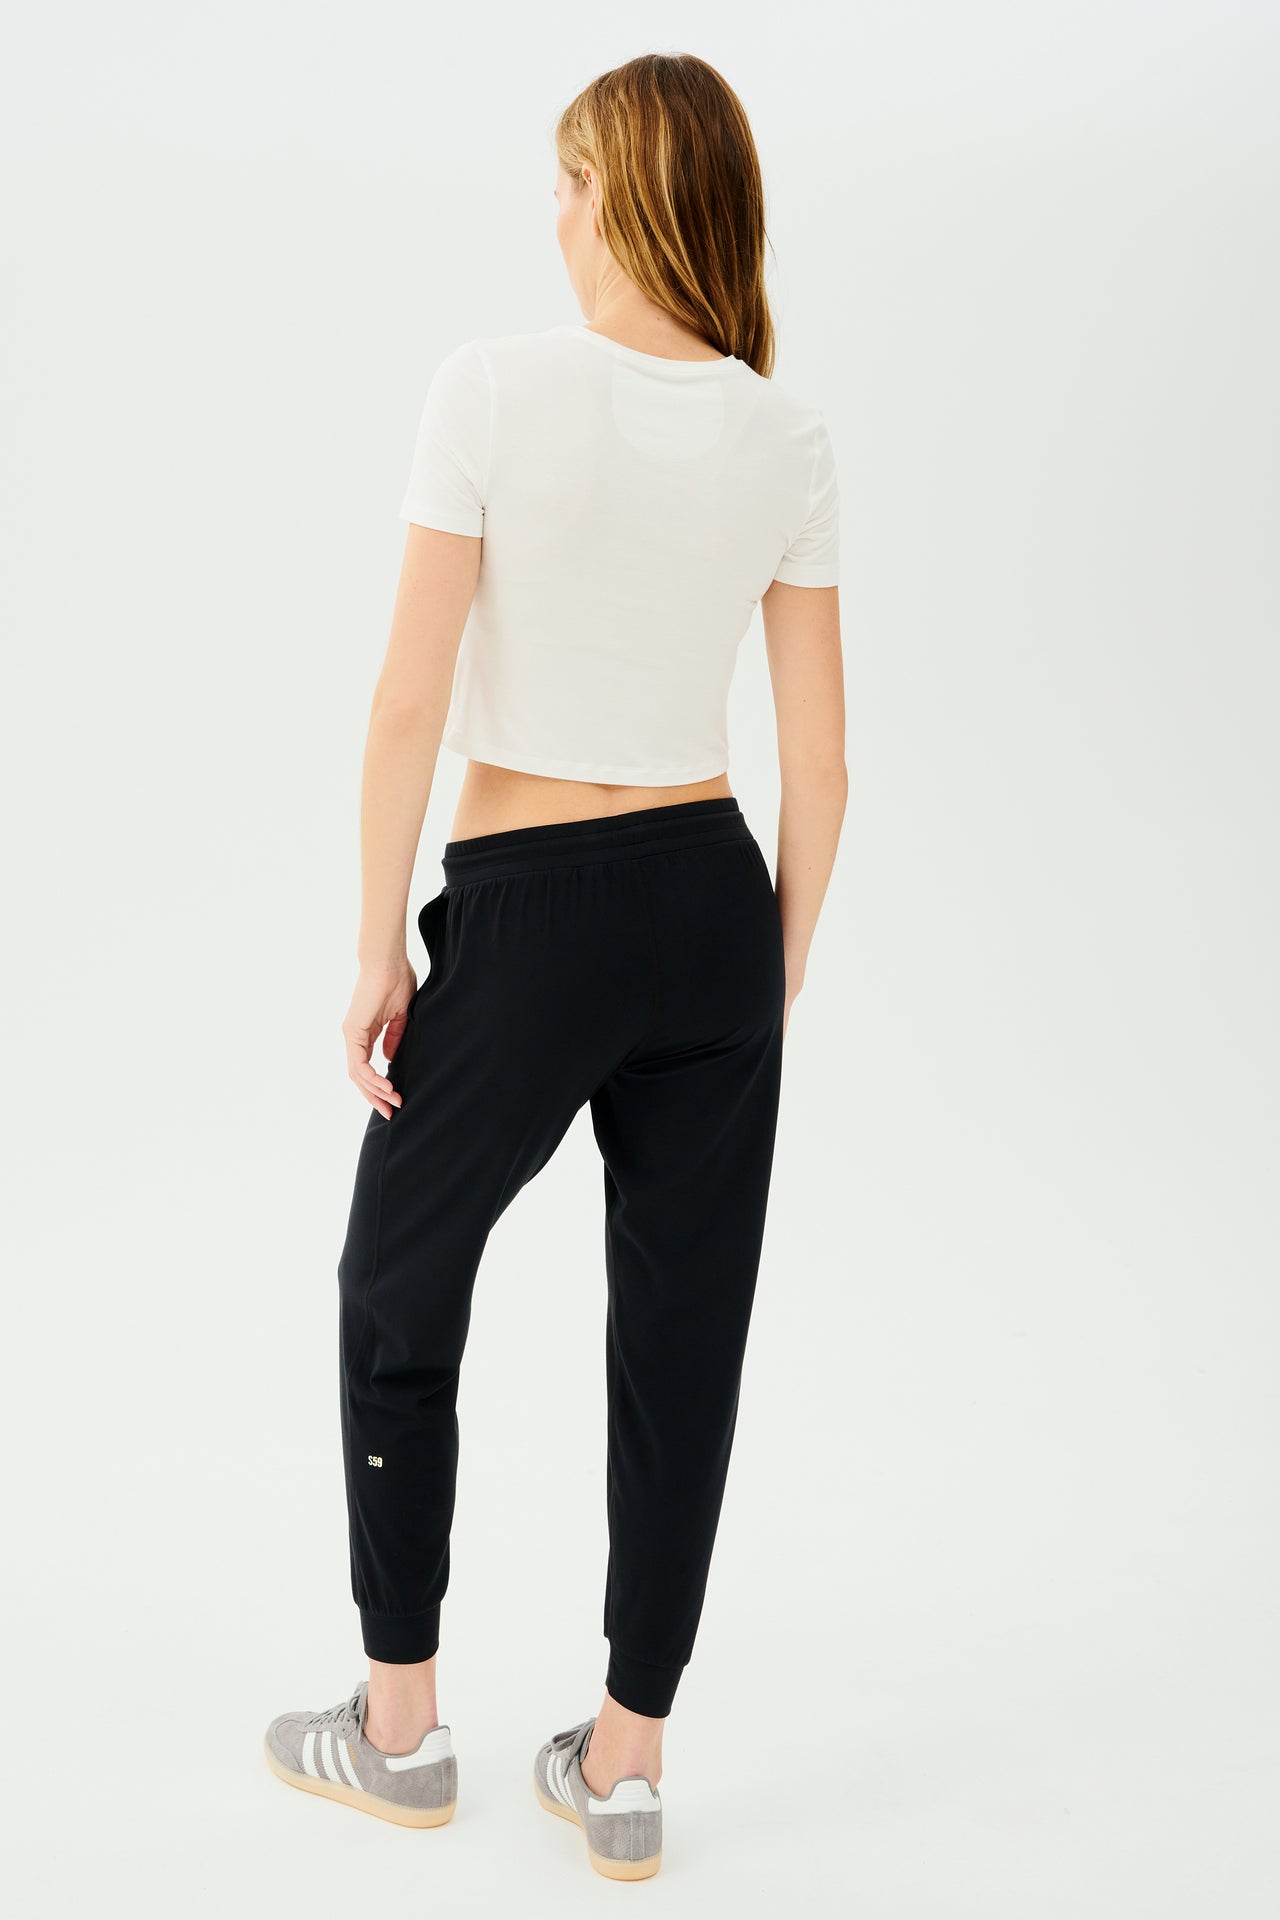 The back view of a woman wearing black high waist leggings and a Daisy Jersey Tee - White by SPLITS59.